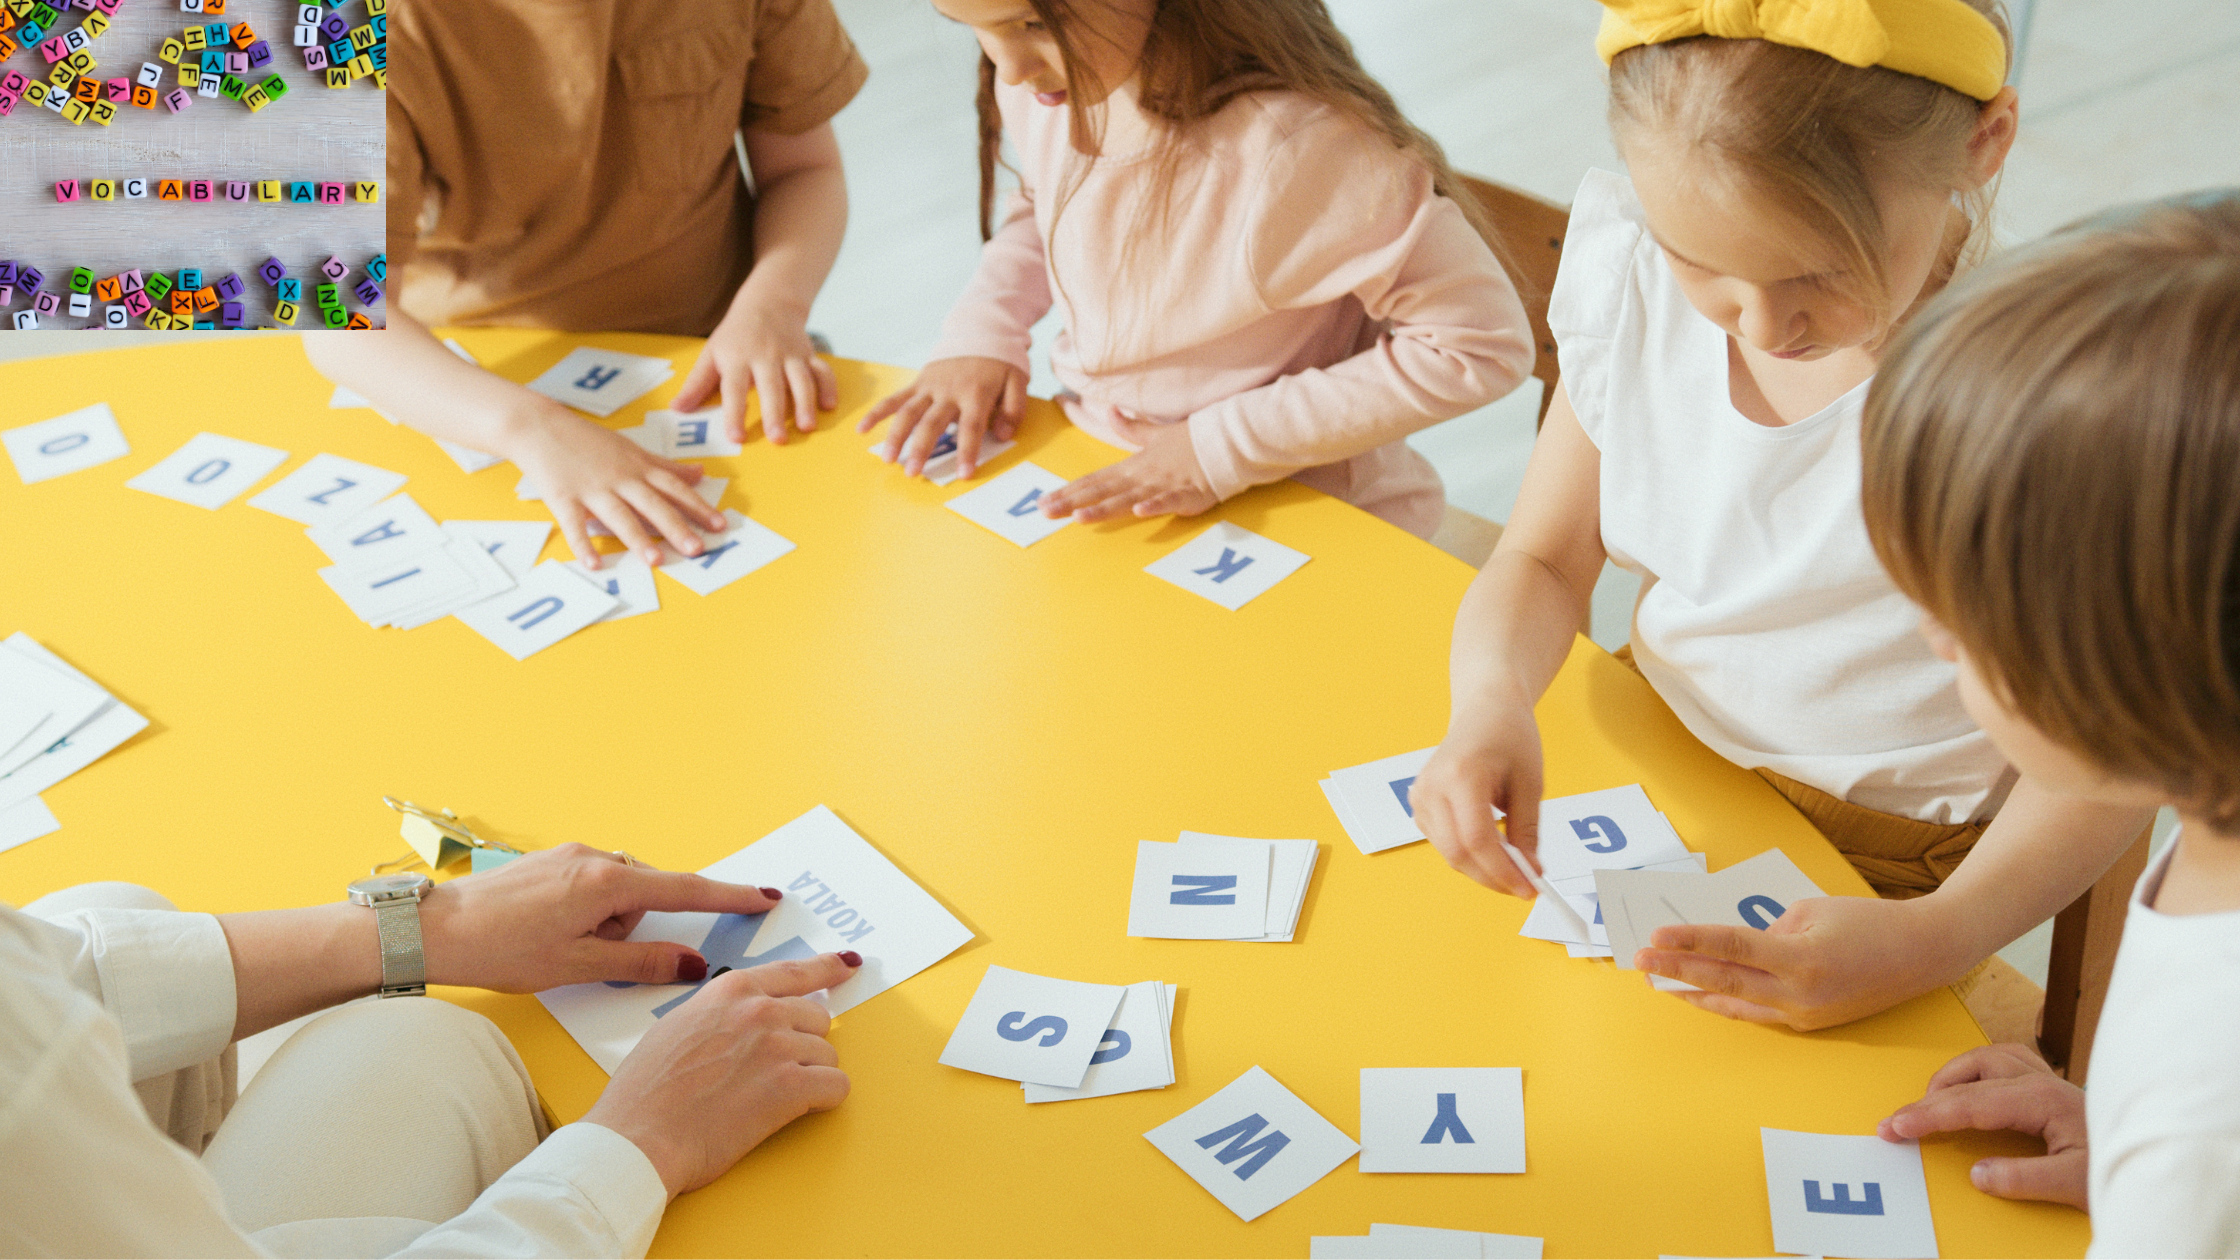 Vocabulary Building Activities for Elementary Students